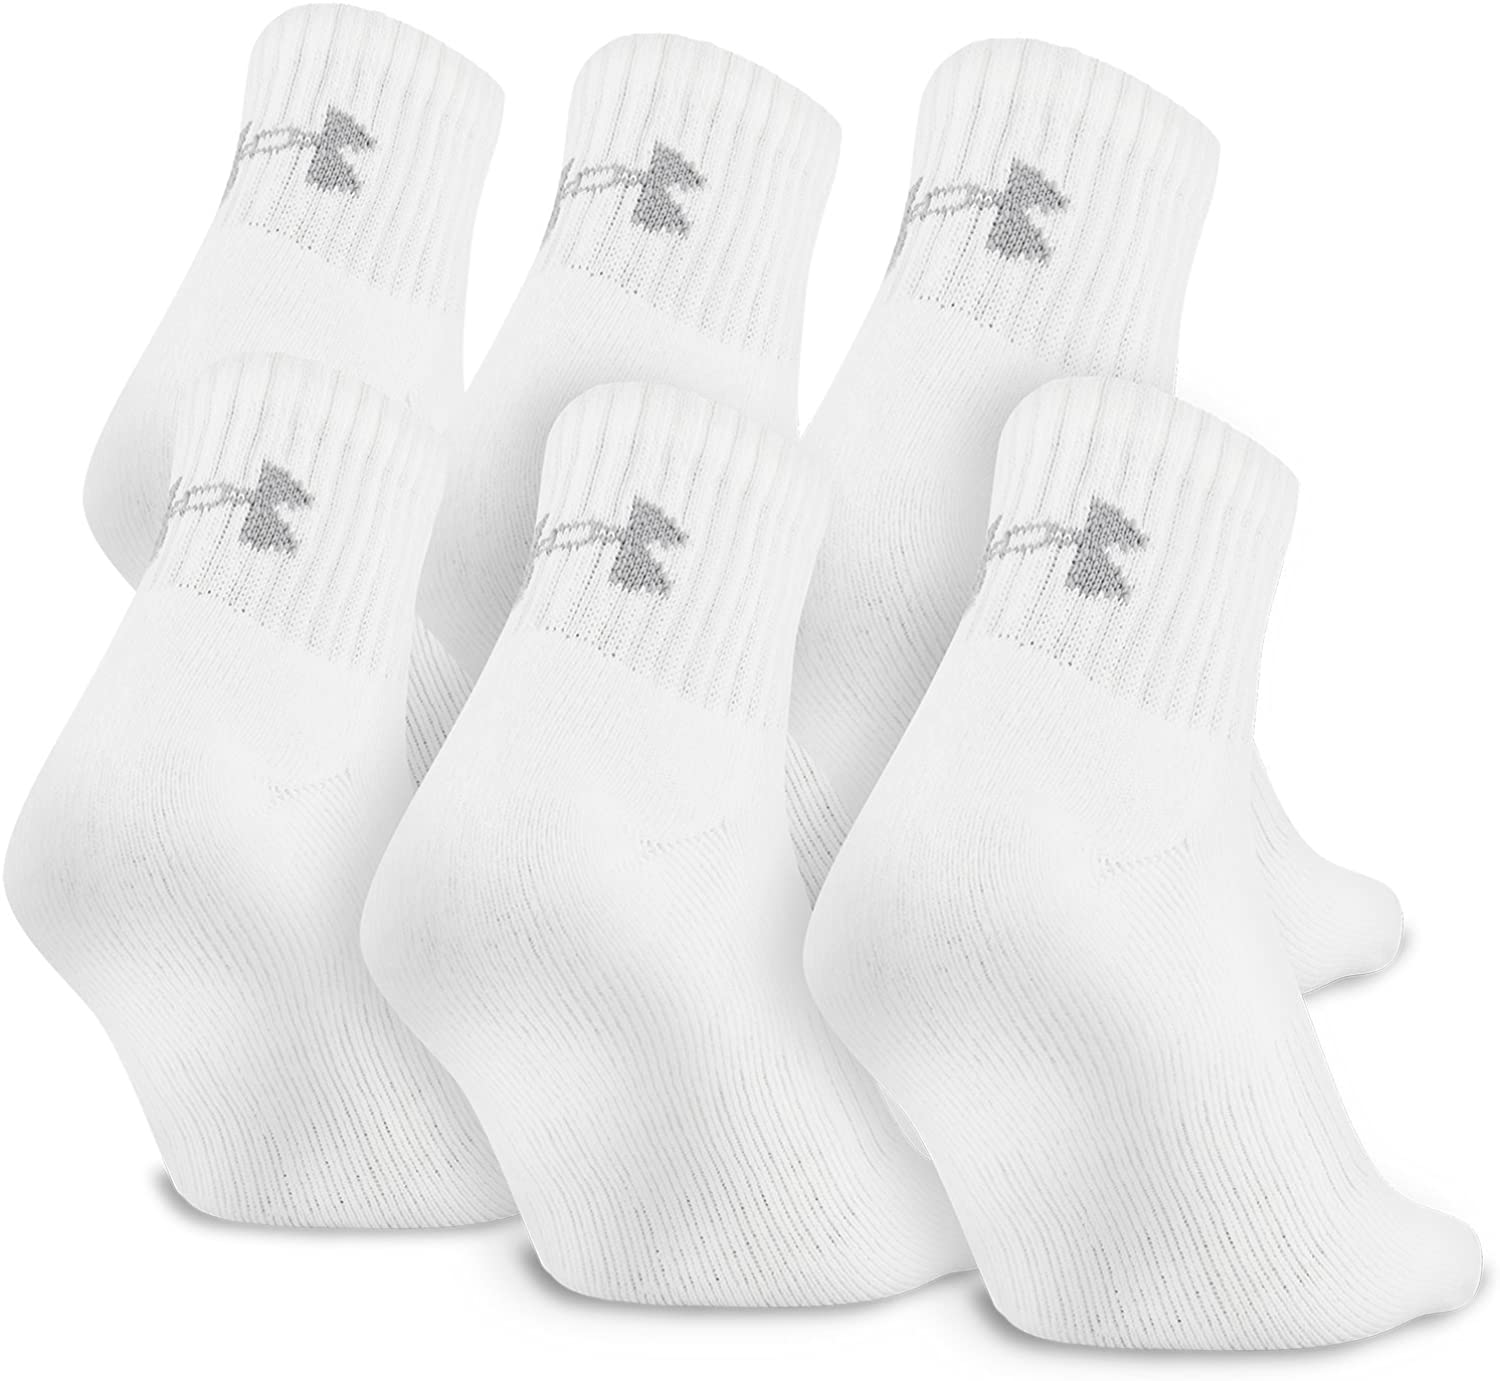 Under Armour Adult Charged Cotton 2.0 Quarter Socks, 6-Pairs | eBay